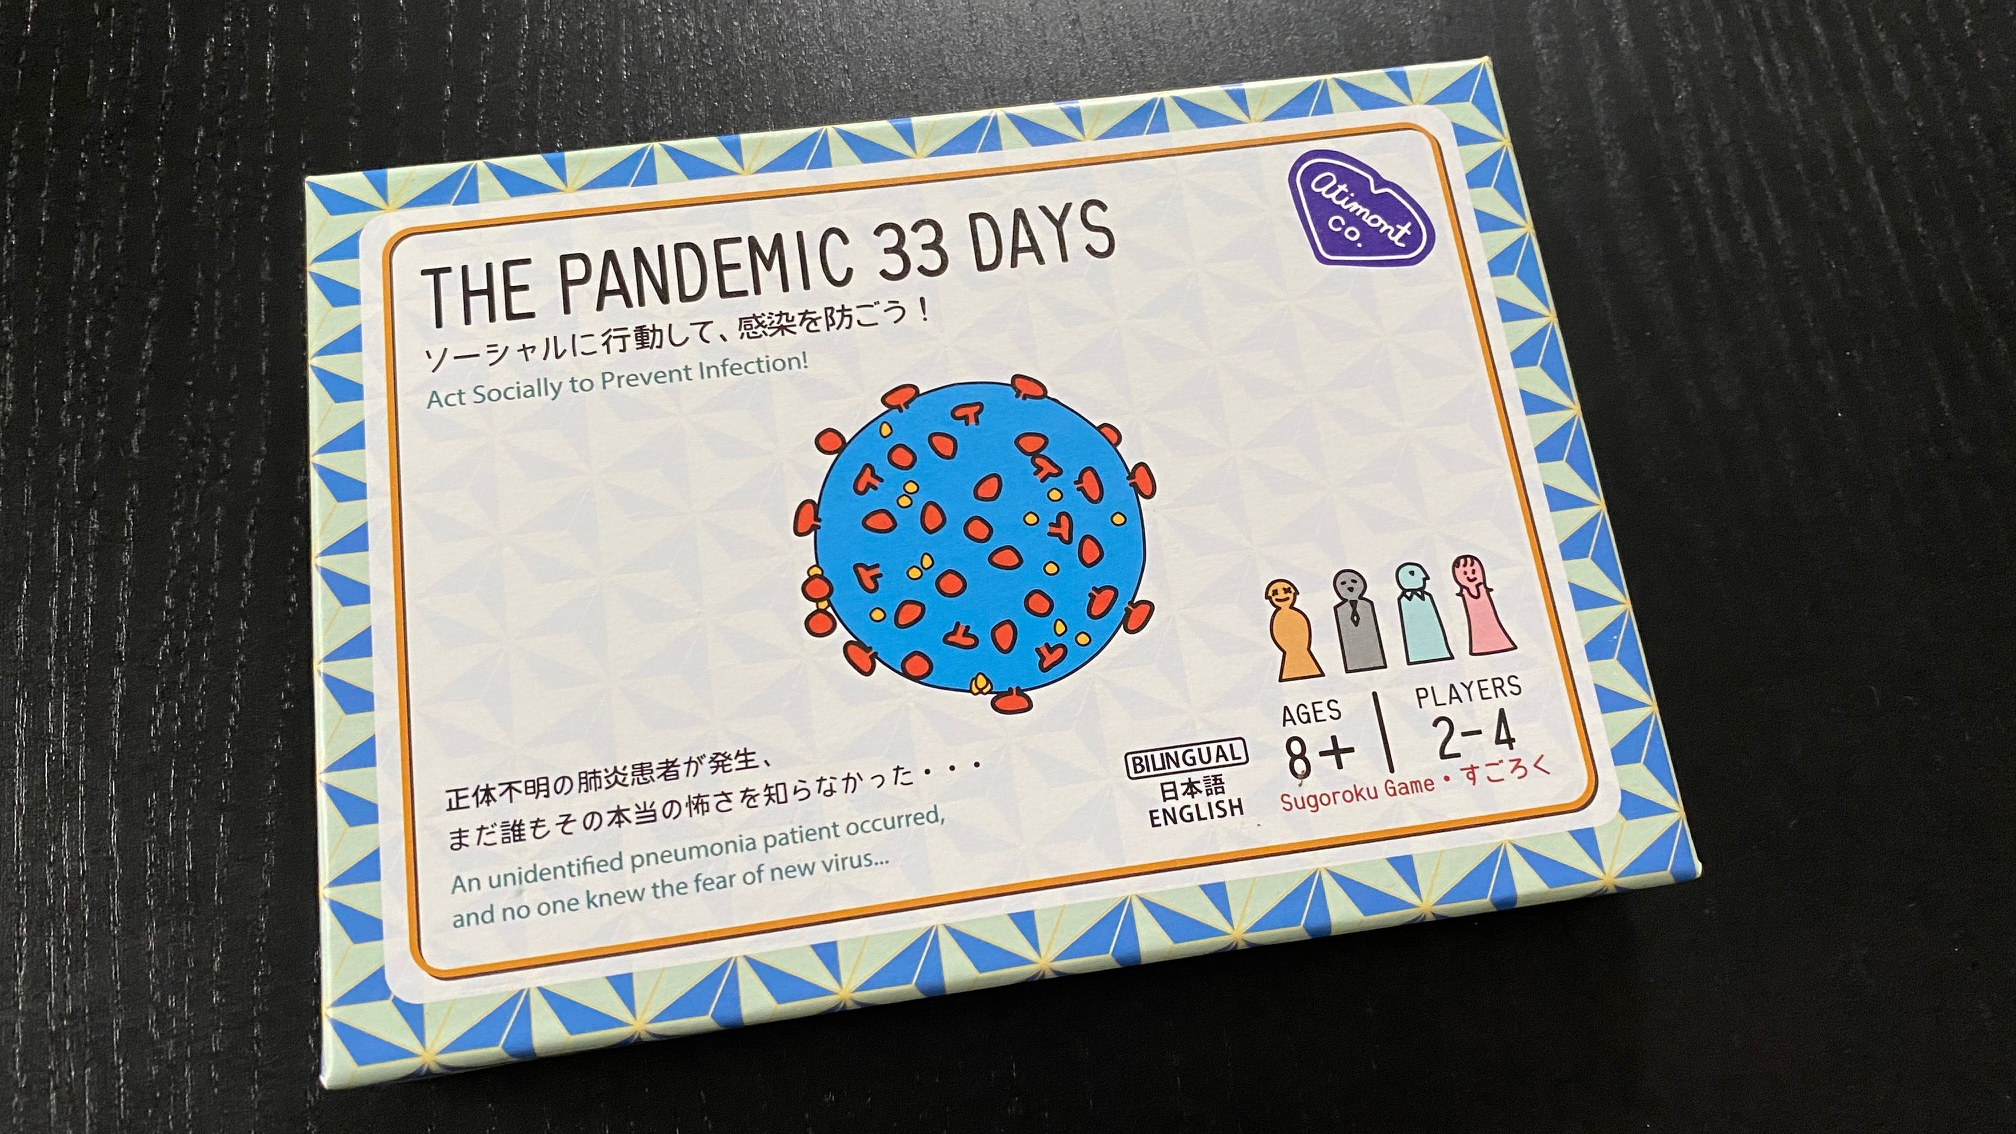 ”THE PANDEMIC 33 DAYS” を1点プレゼント